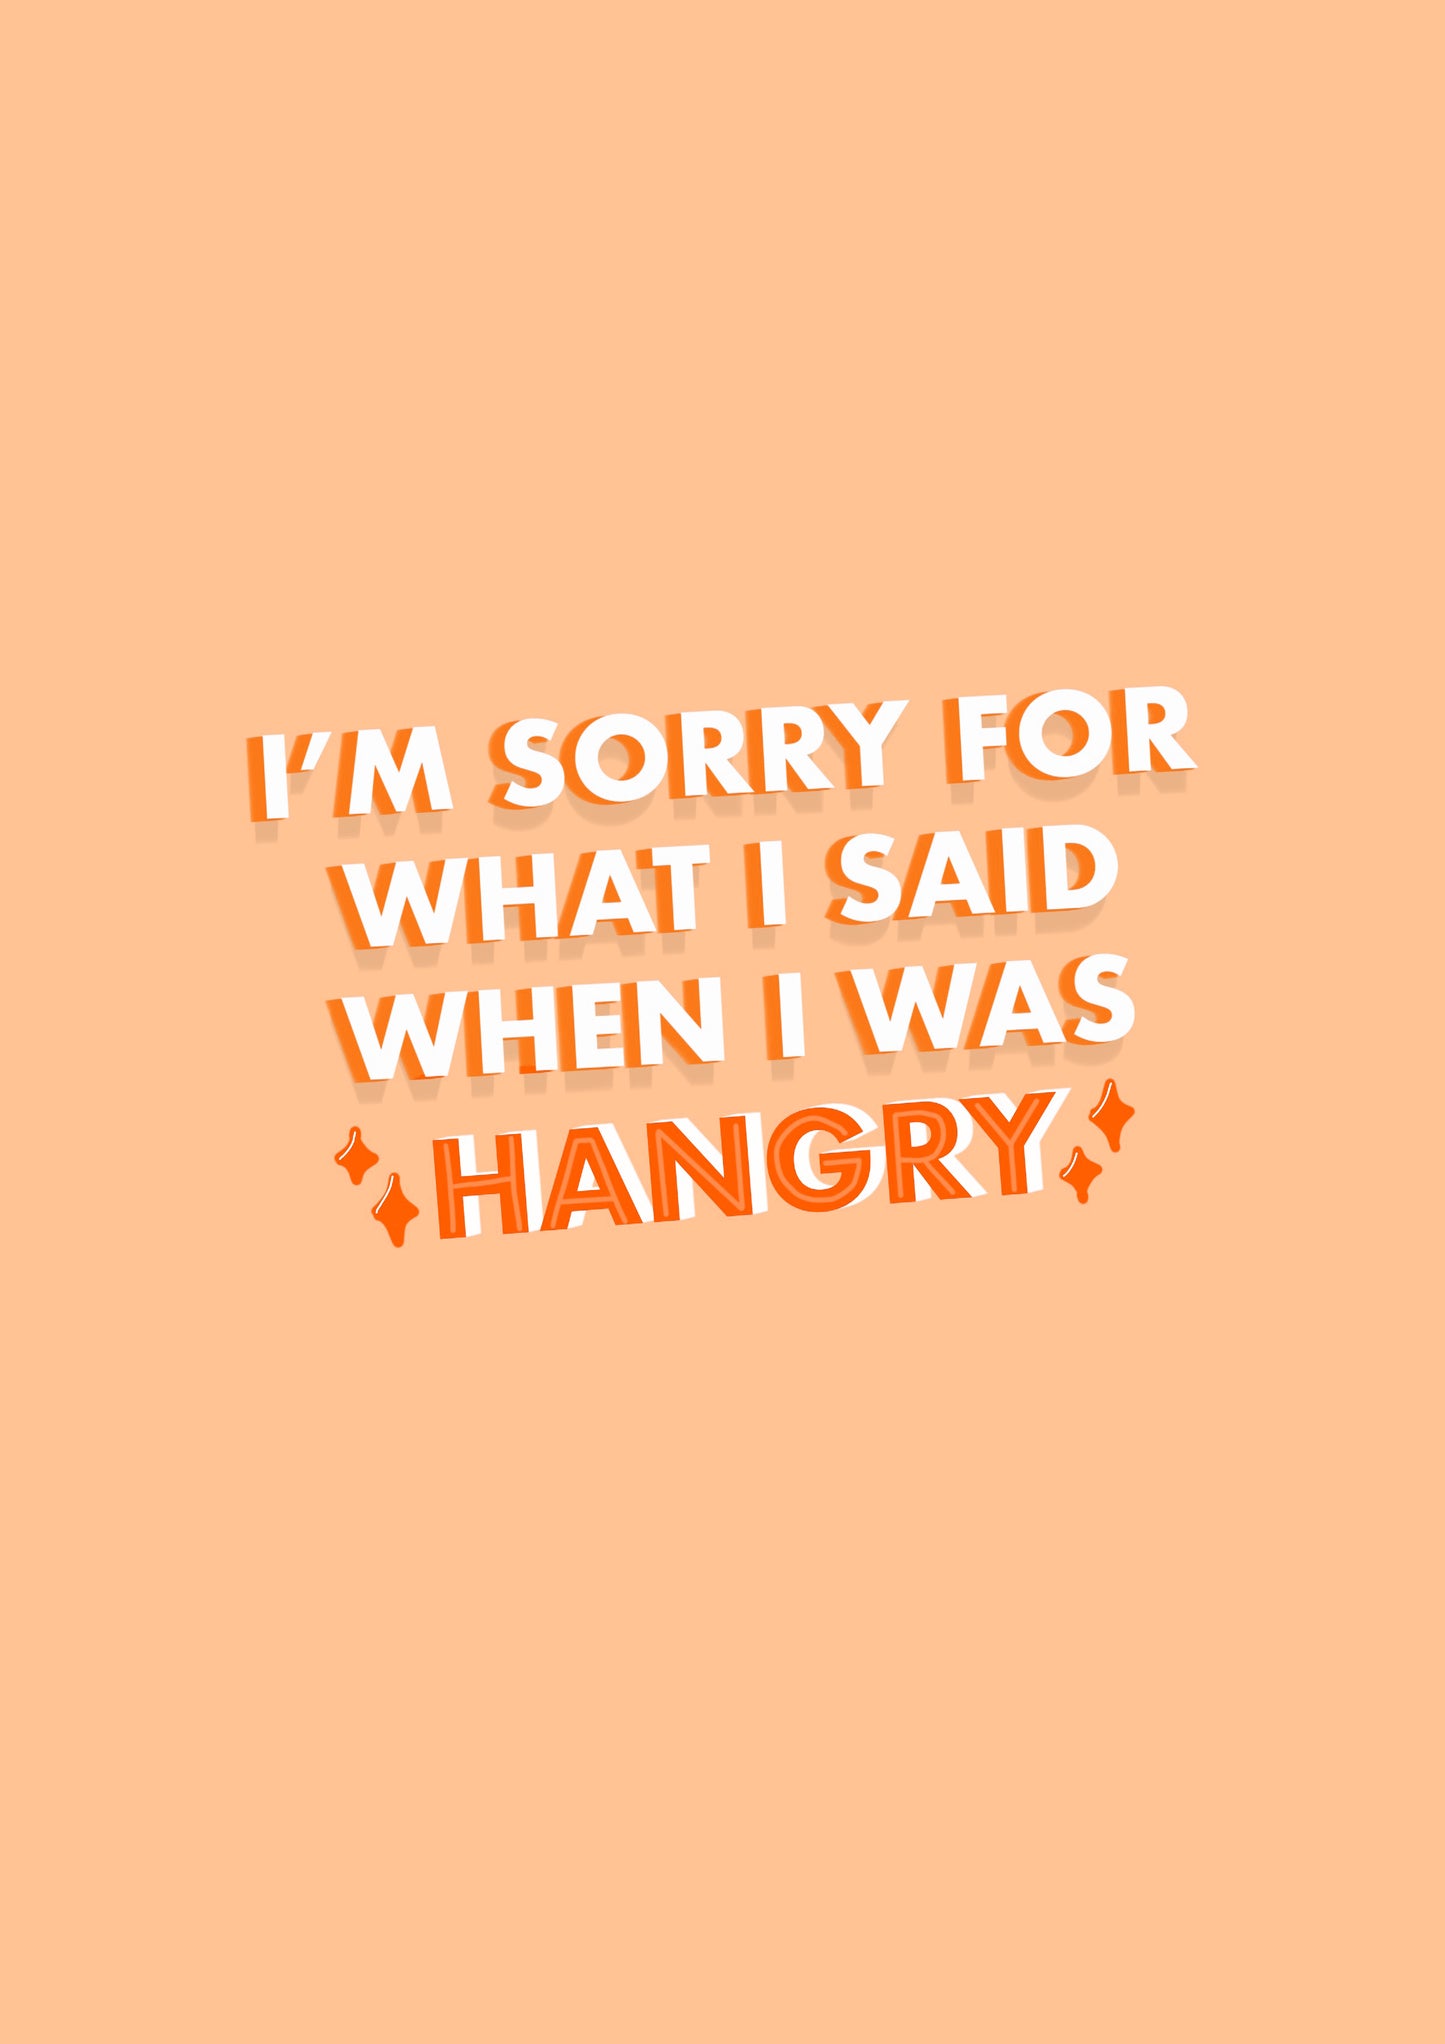 I'm sorry for what I said when I was hangry Funny Quote Print